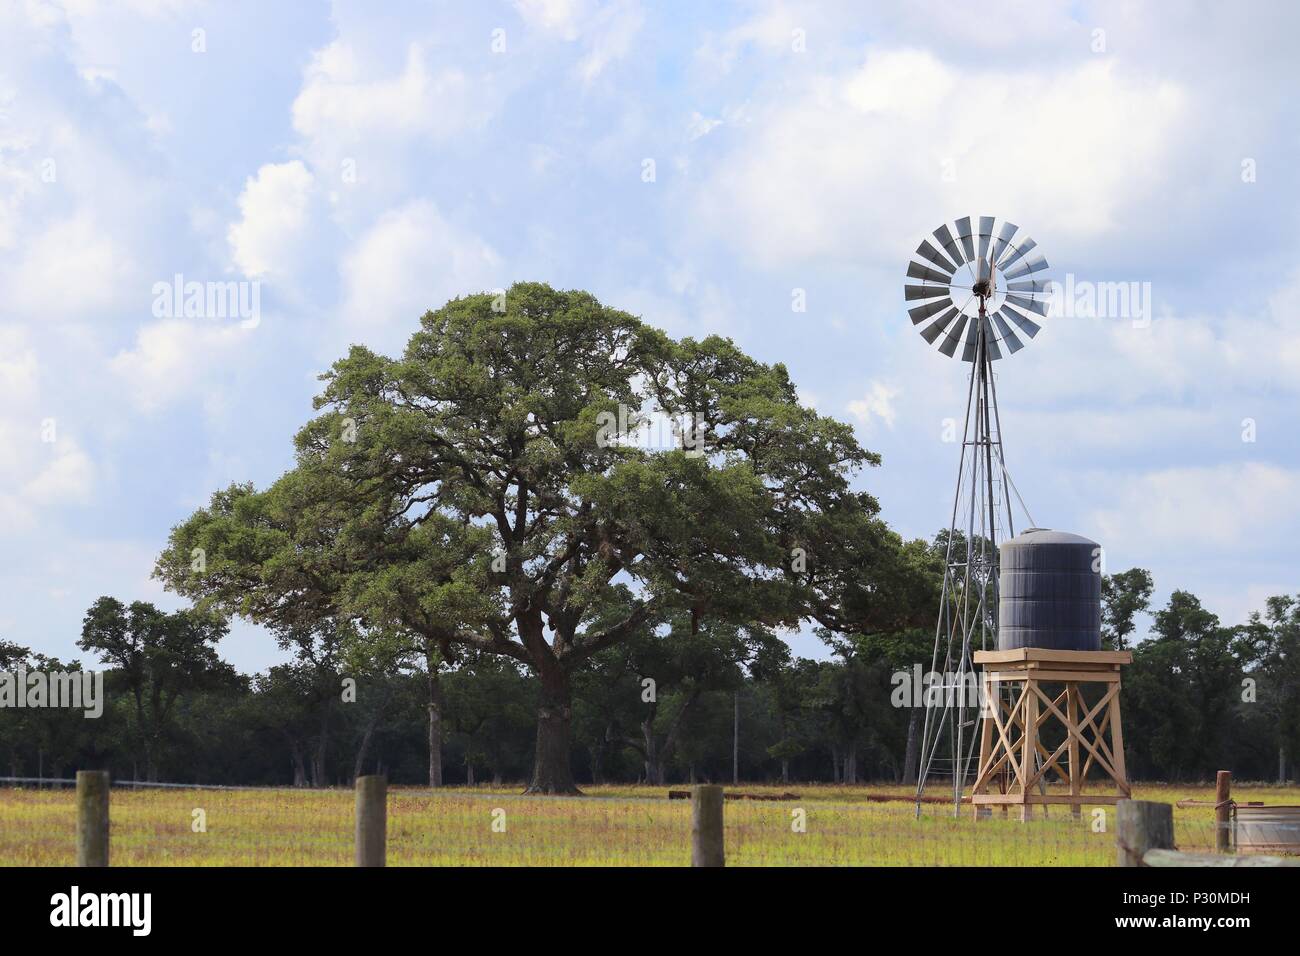 Rural landscape scenery in Texas, United States of America. Oak tree and windmill on farmland, Texan Ranch, Lone Star State. Stock Photo